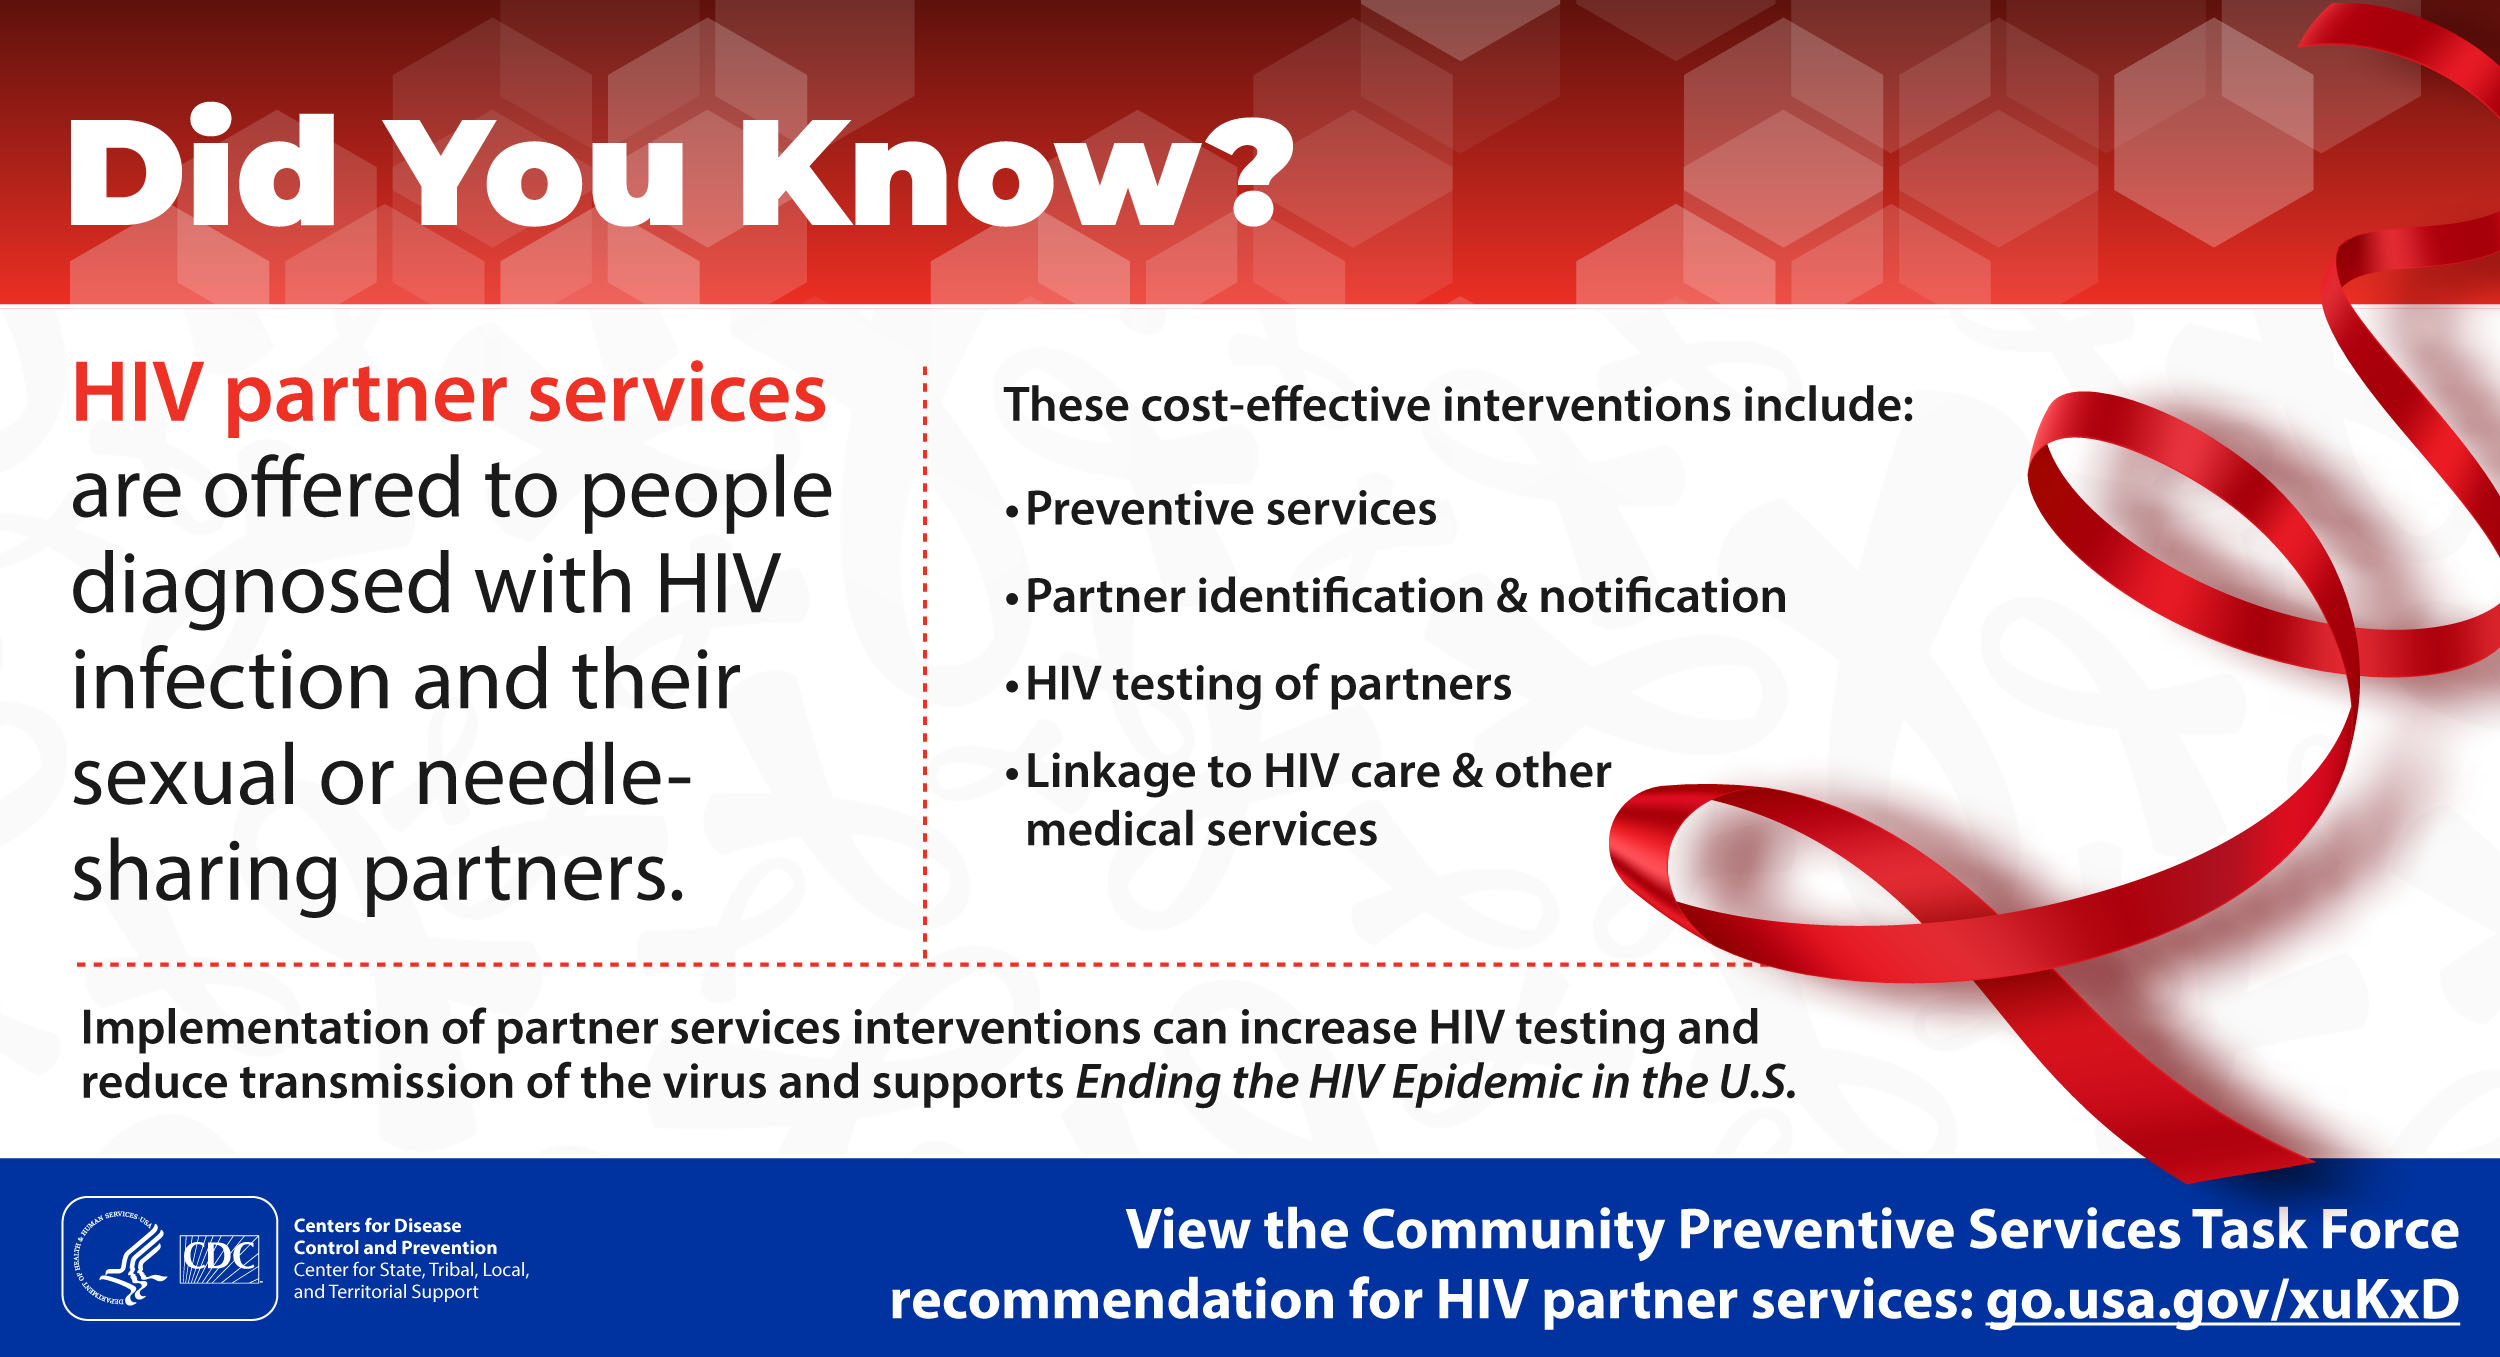 Did You Know? HIV partner services are offered to people diagnosed with HIV infection and their sexual or needle-sharing partners. These cost-effective interventions include: preventive services; partner identification & notification; HIV testing of partners; linkage to HIV care & other medical services. Implementation of partner services interventions can increase HIV testing and reduce transmission of the virus and supports Ending the HIV Epidemic in the U.S. View the Community Preventive Services Task Force recommendation at https://go.usa.gov/xuKxD.